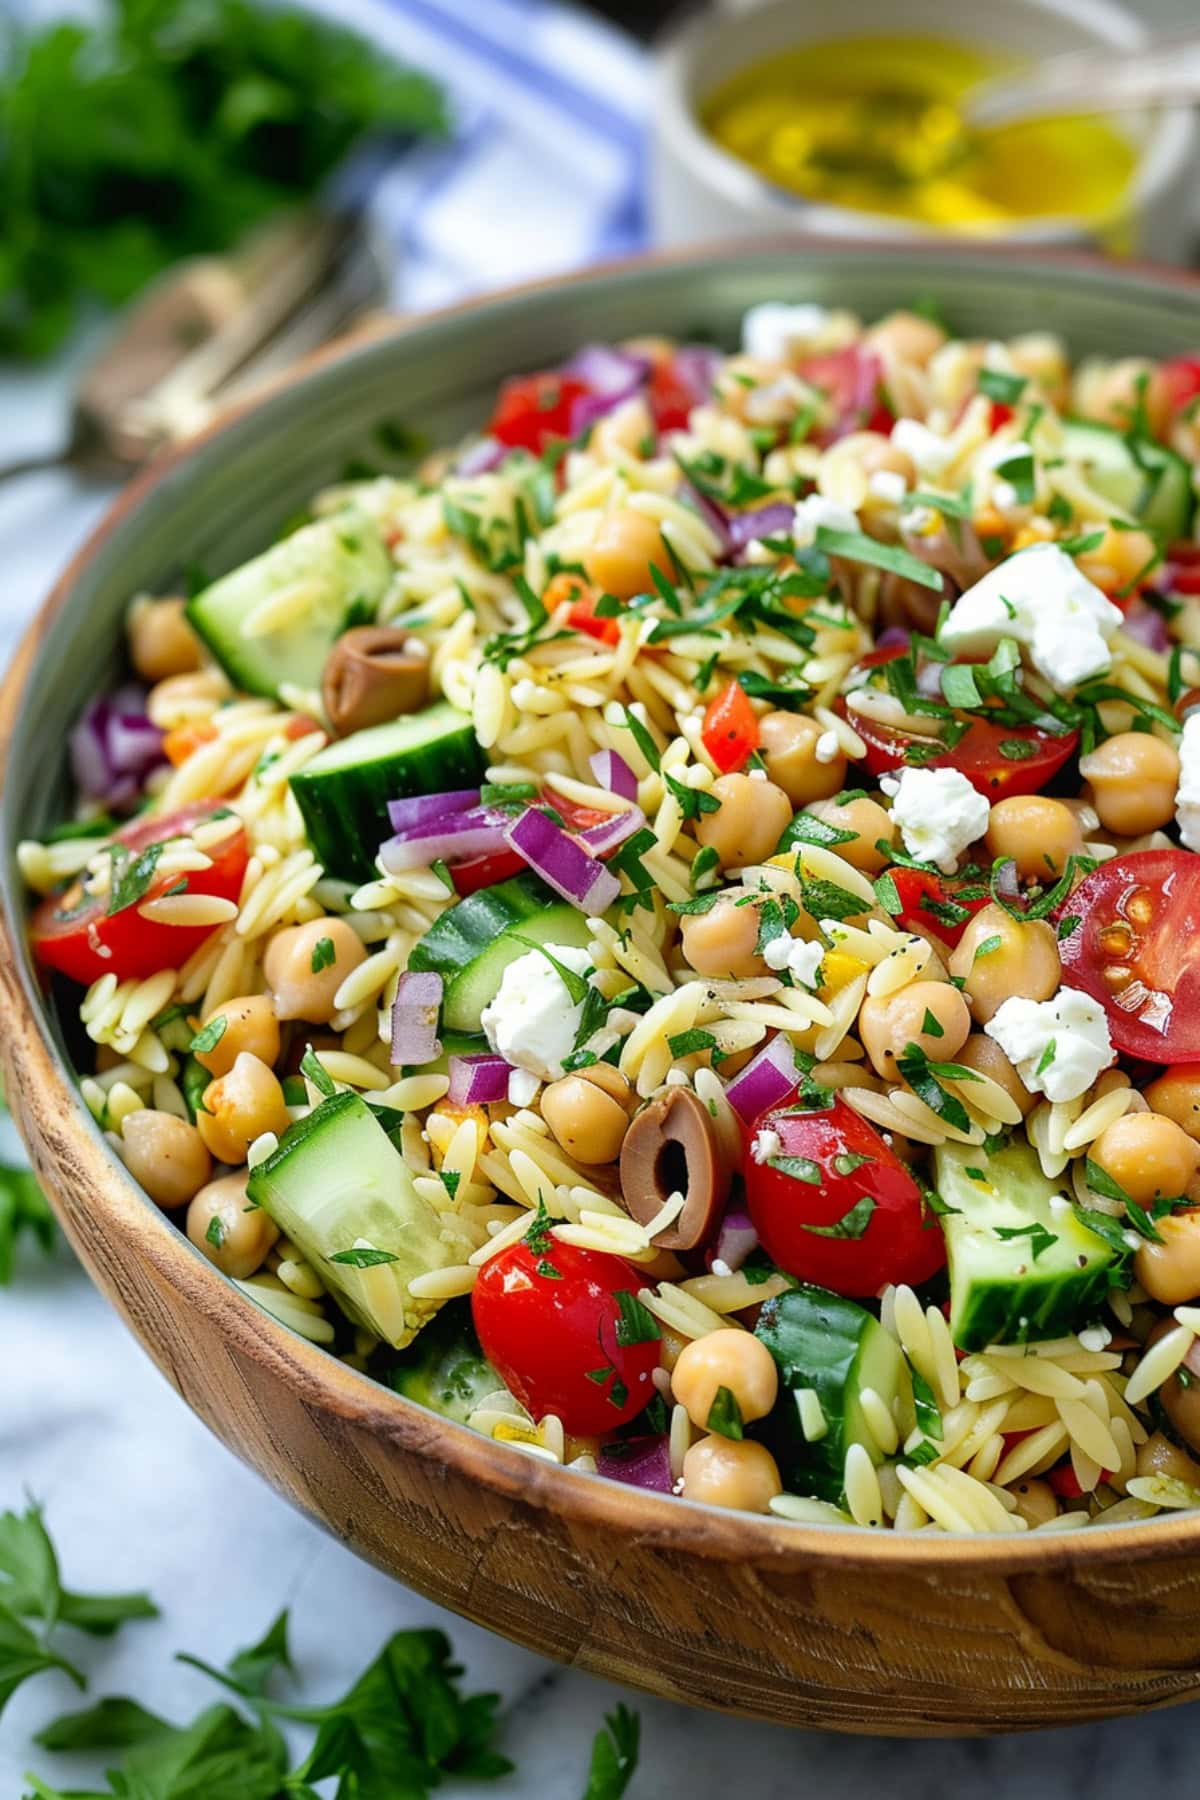 Greek orzo pasta salad made with mix of diced English cucumber, halved cherry tomatoes, drained and rinsed chickpeas, finely chopped red onion, crumbled feta cheese, chopped fresh basil, chopped fresh parsley served in a wooden bowl.